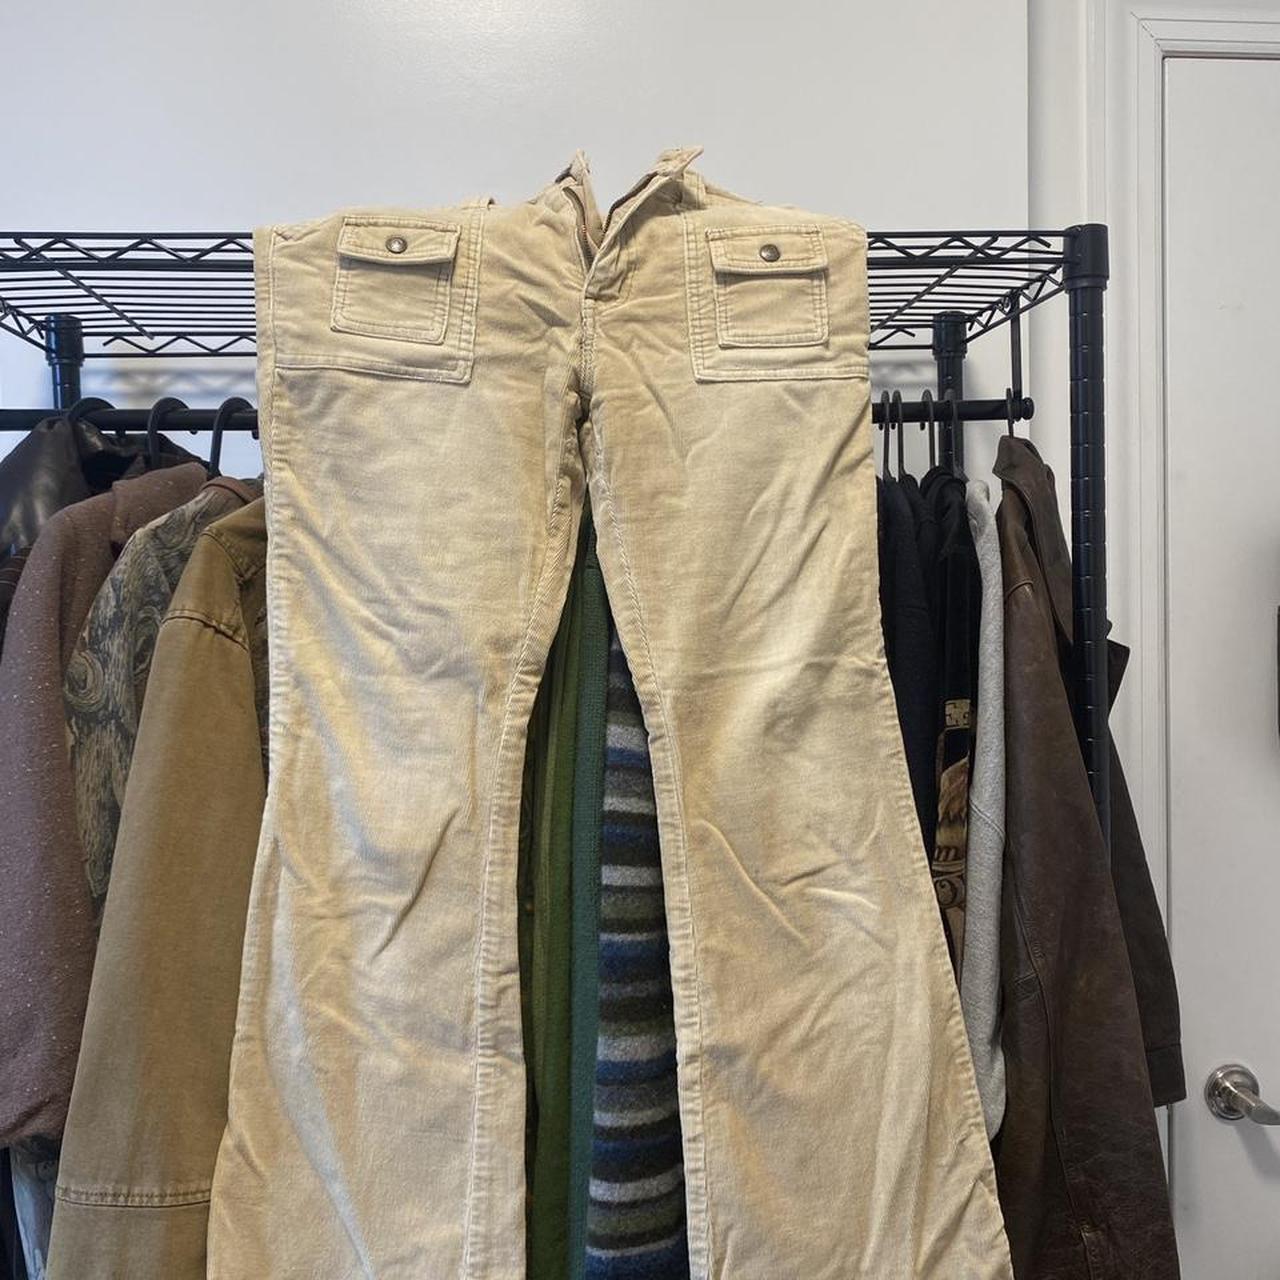 Women's Tan and Cream Jeans (2)